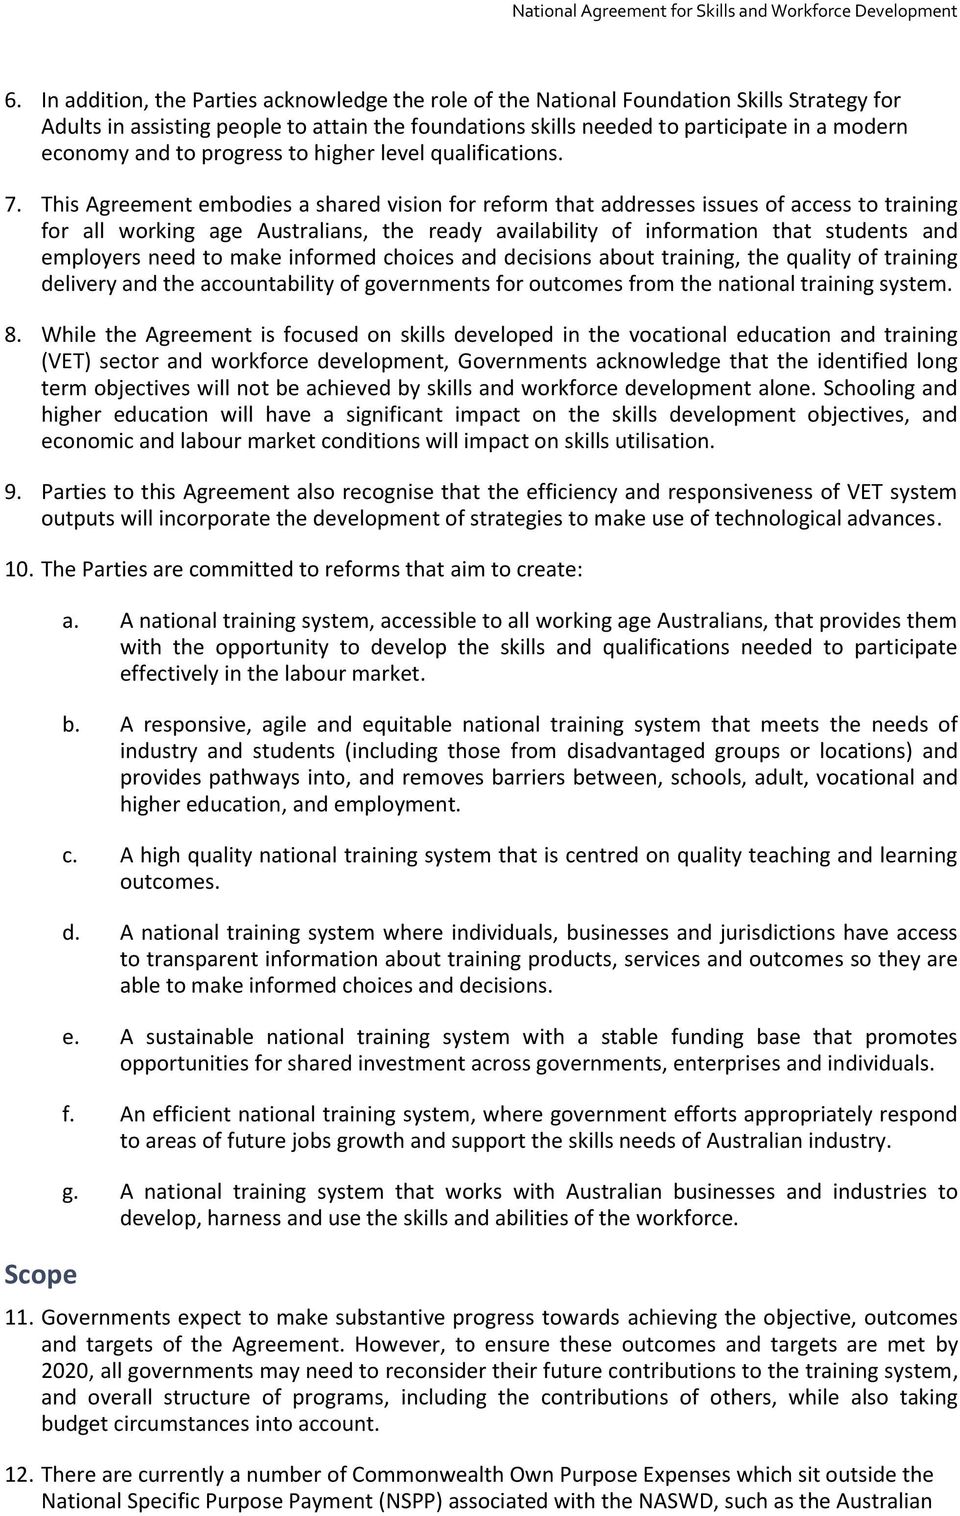 This Agreement embodies a shared vision for reform that addresses issues of access to training for all working age Australians, the ready availability of information that students and employers need